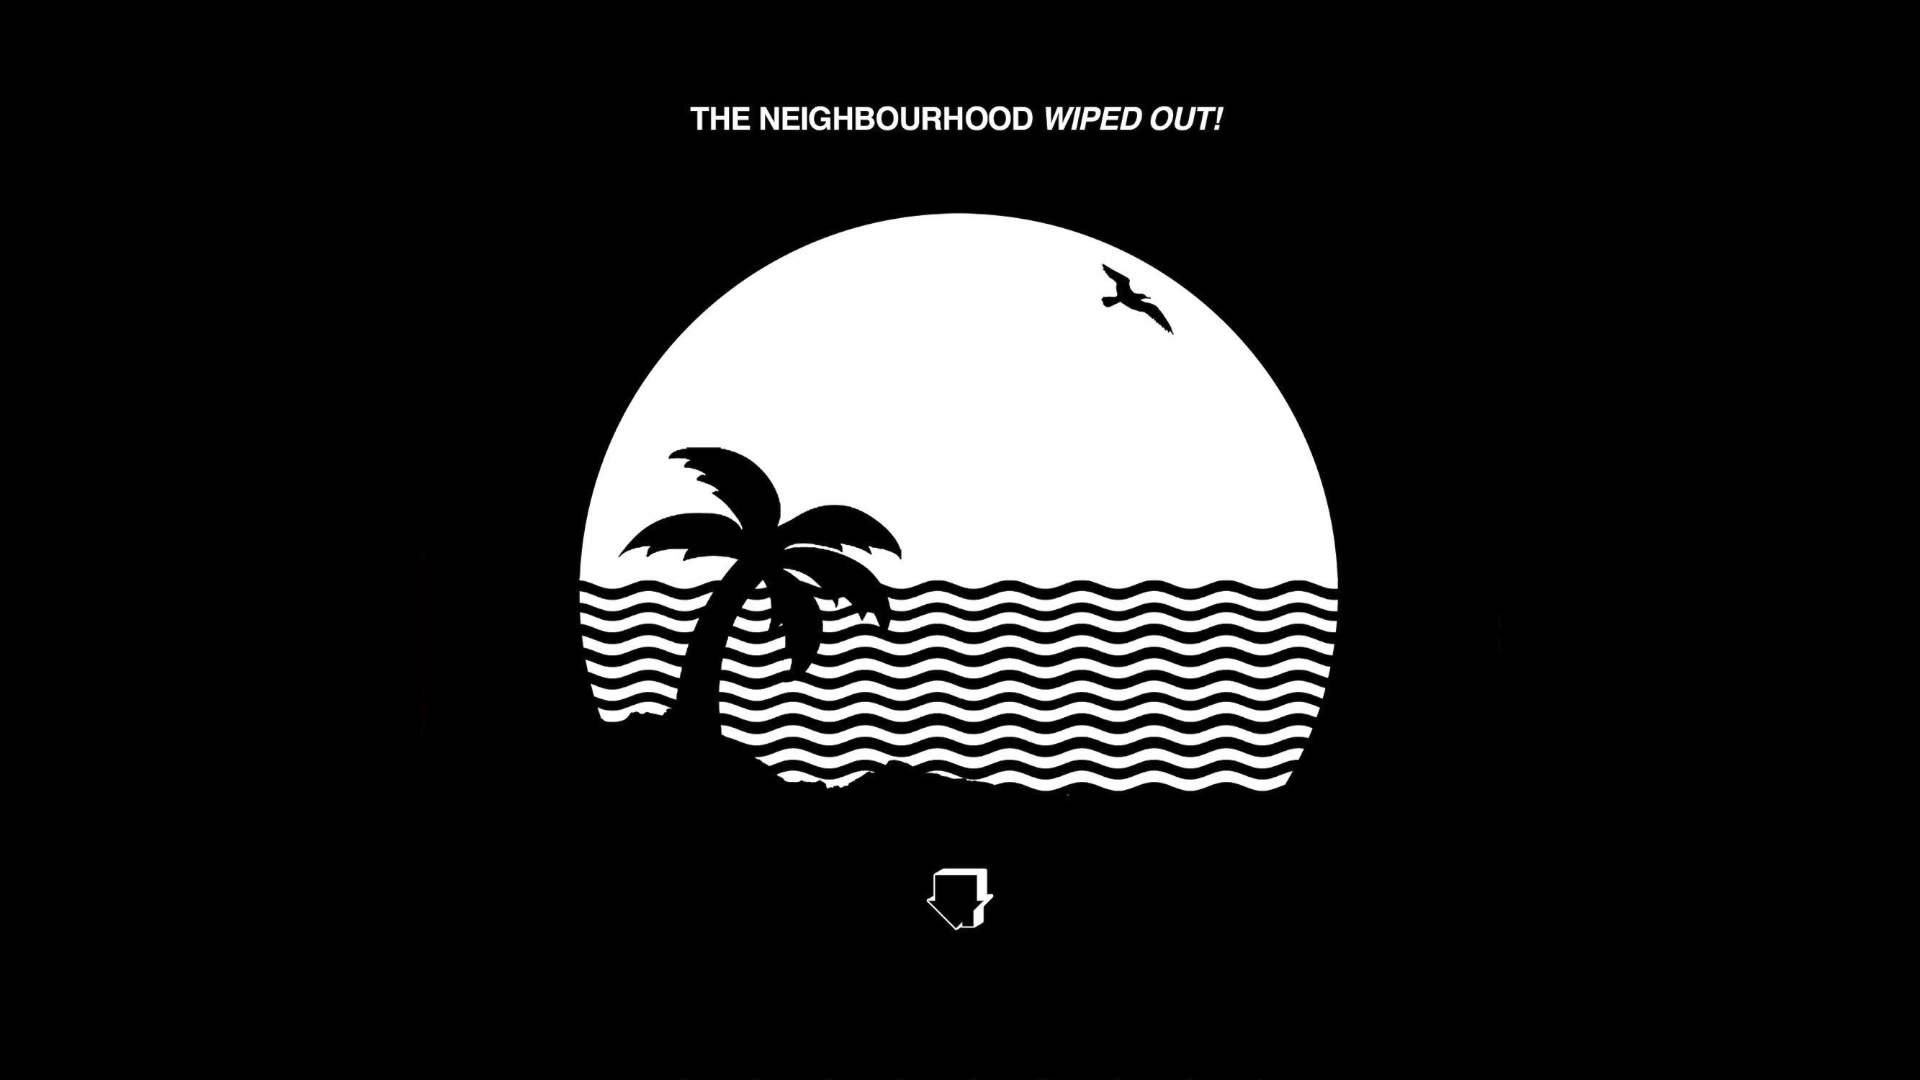 The neighbourhood, Daddy issues, Wipe out.